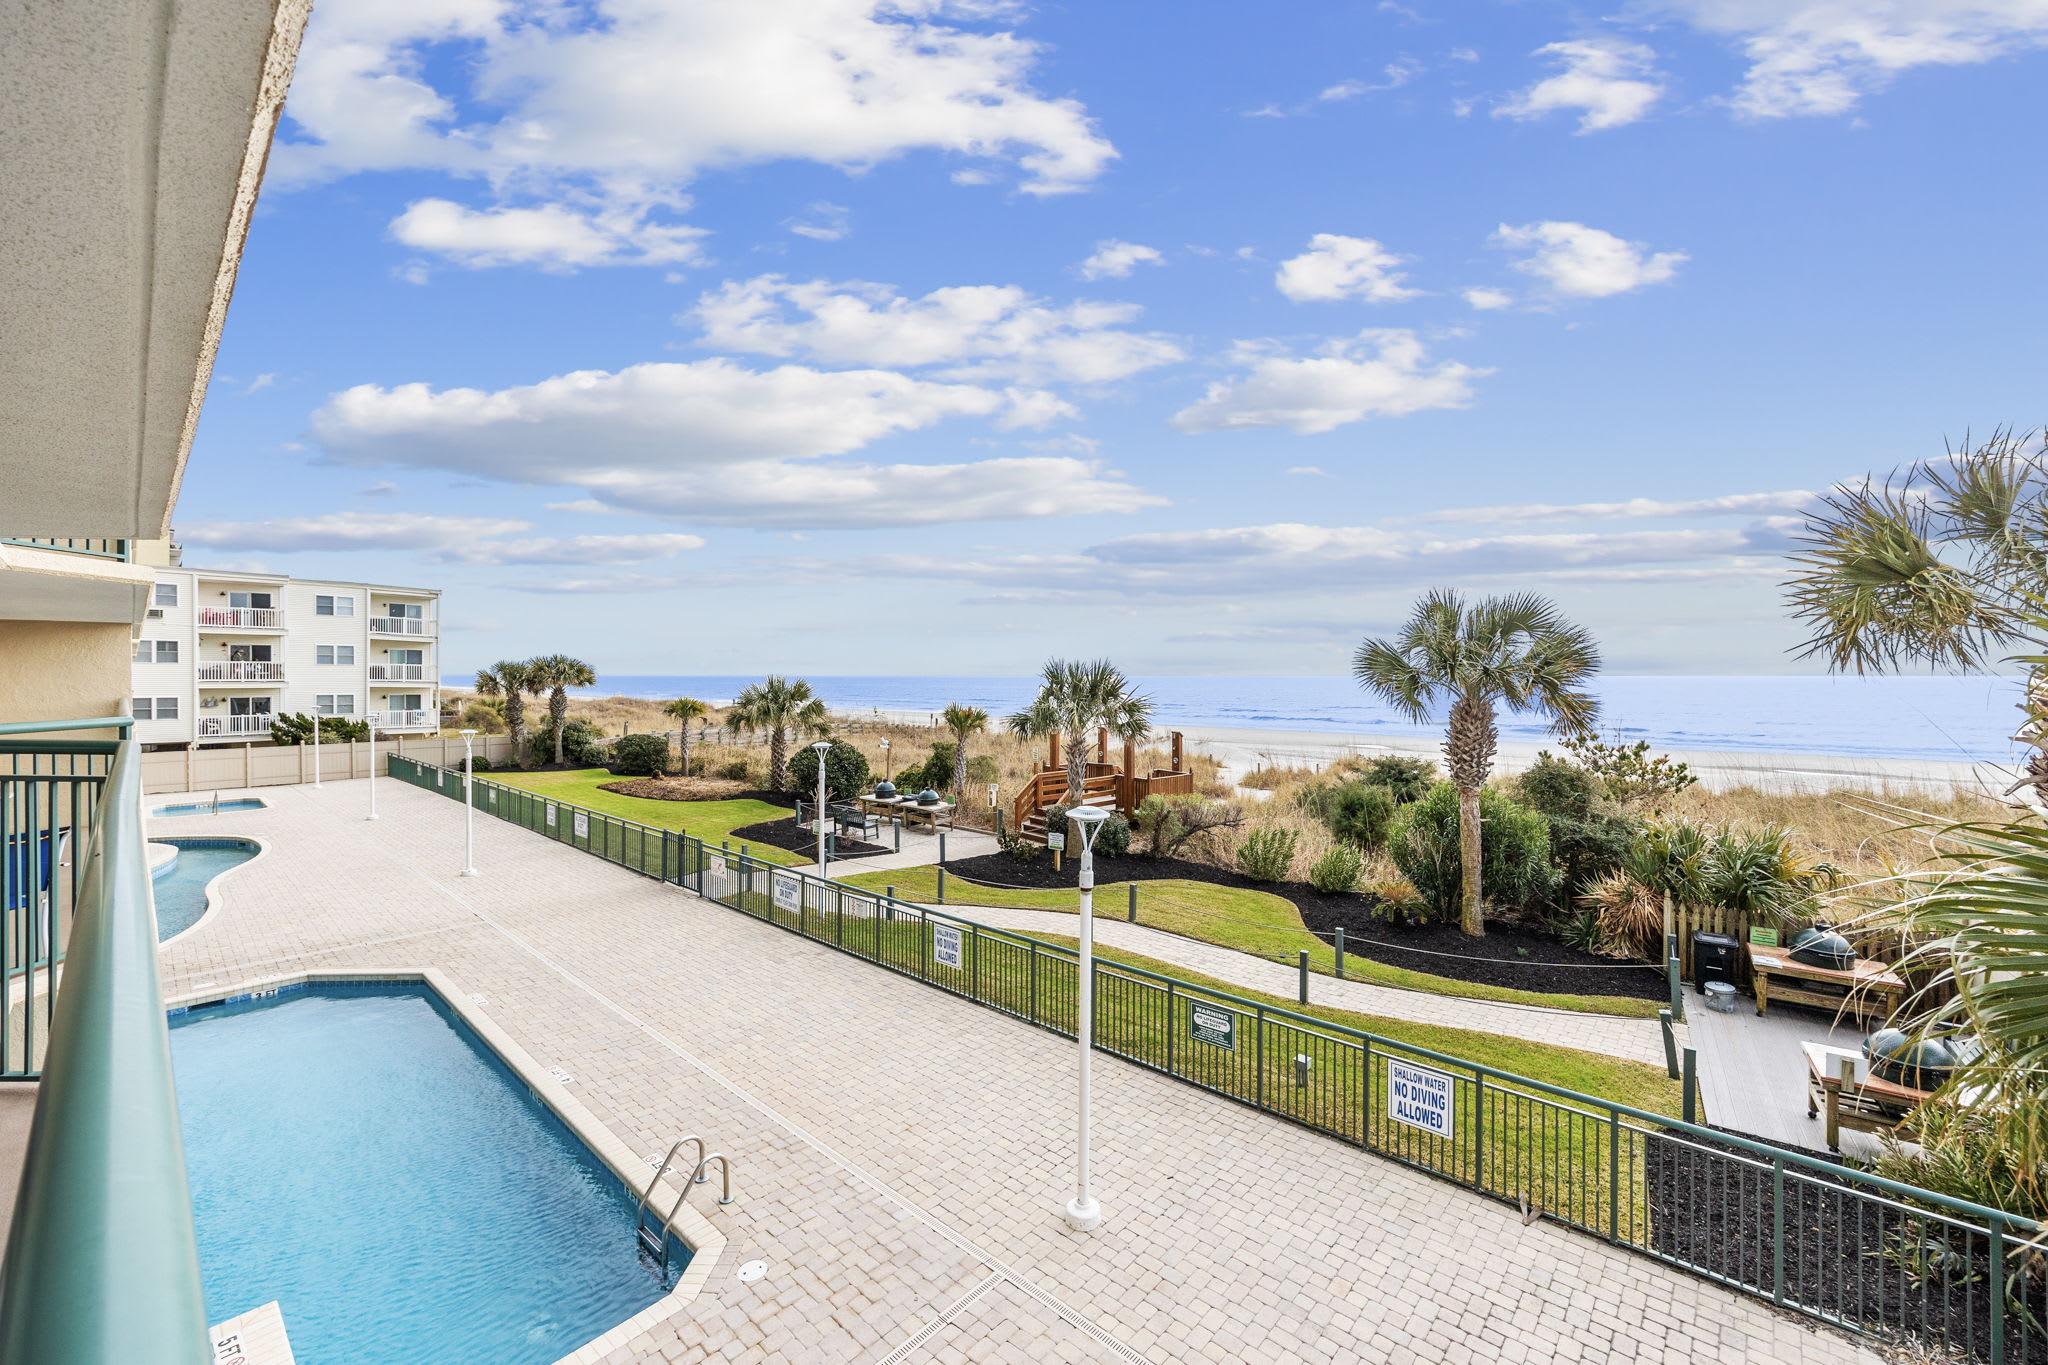 Oceanfront Luxury Top Location Lazy River Pool Grills